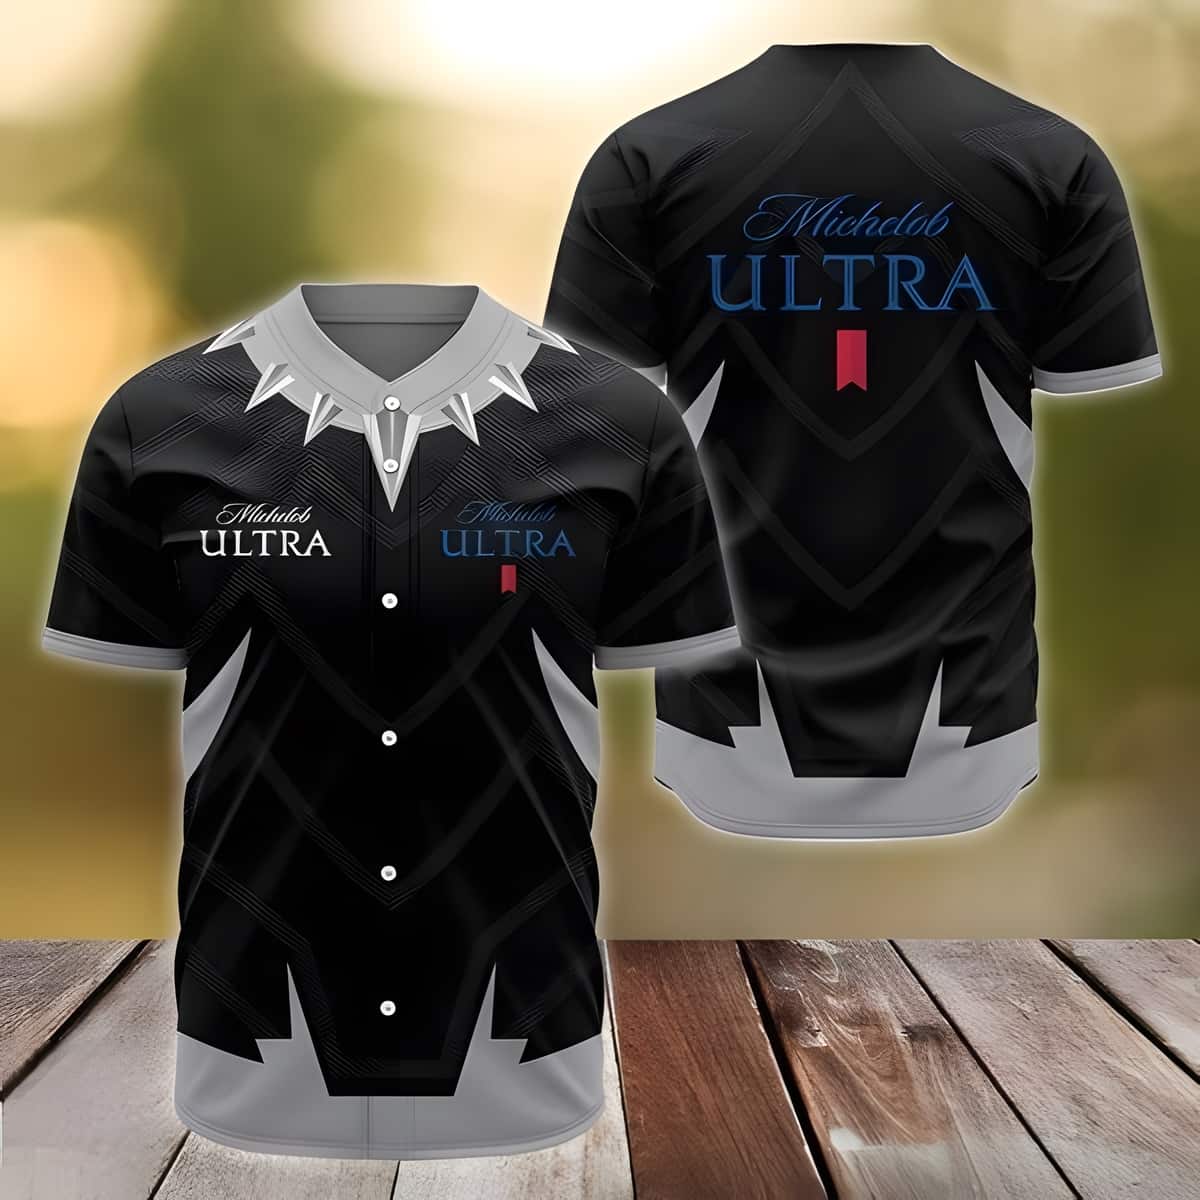 Cool Black Michelob ULTRA Baseball Jersey Gift For Friends